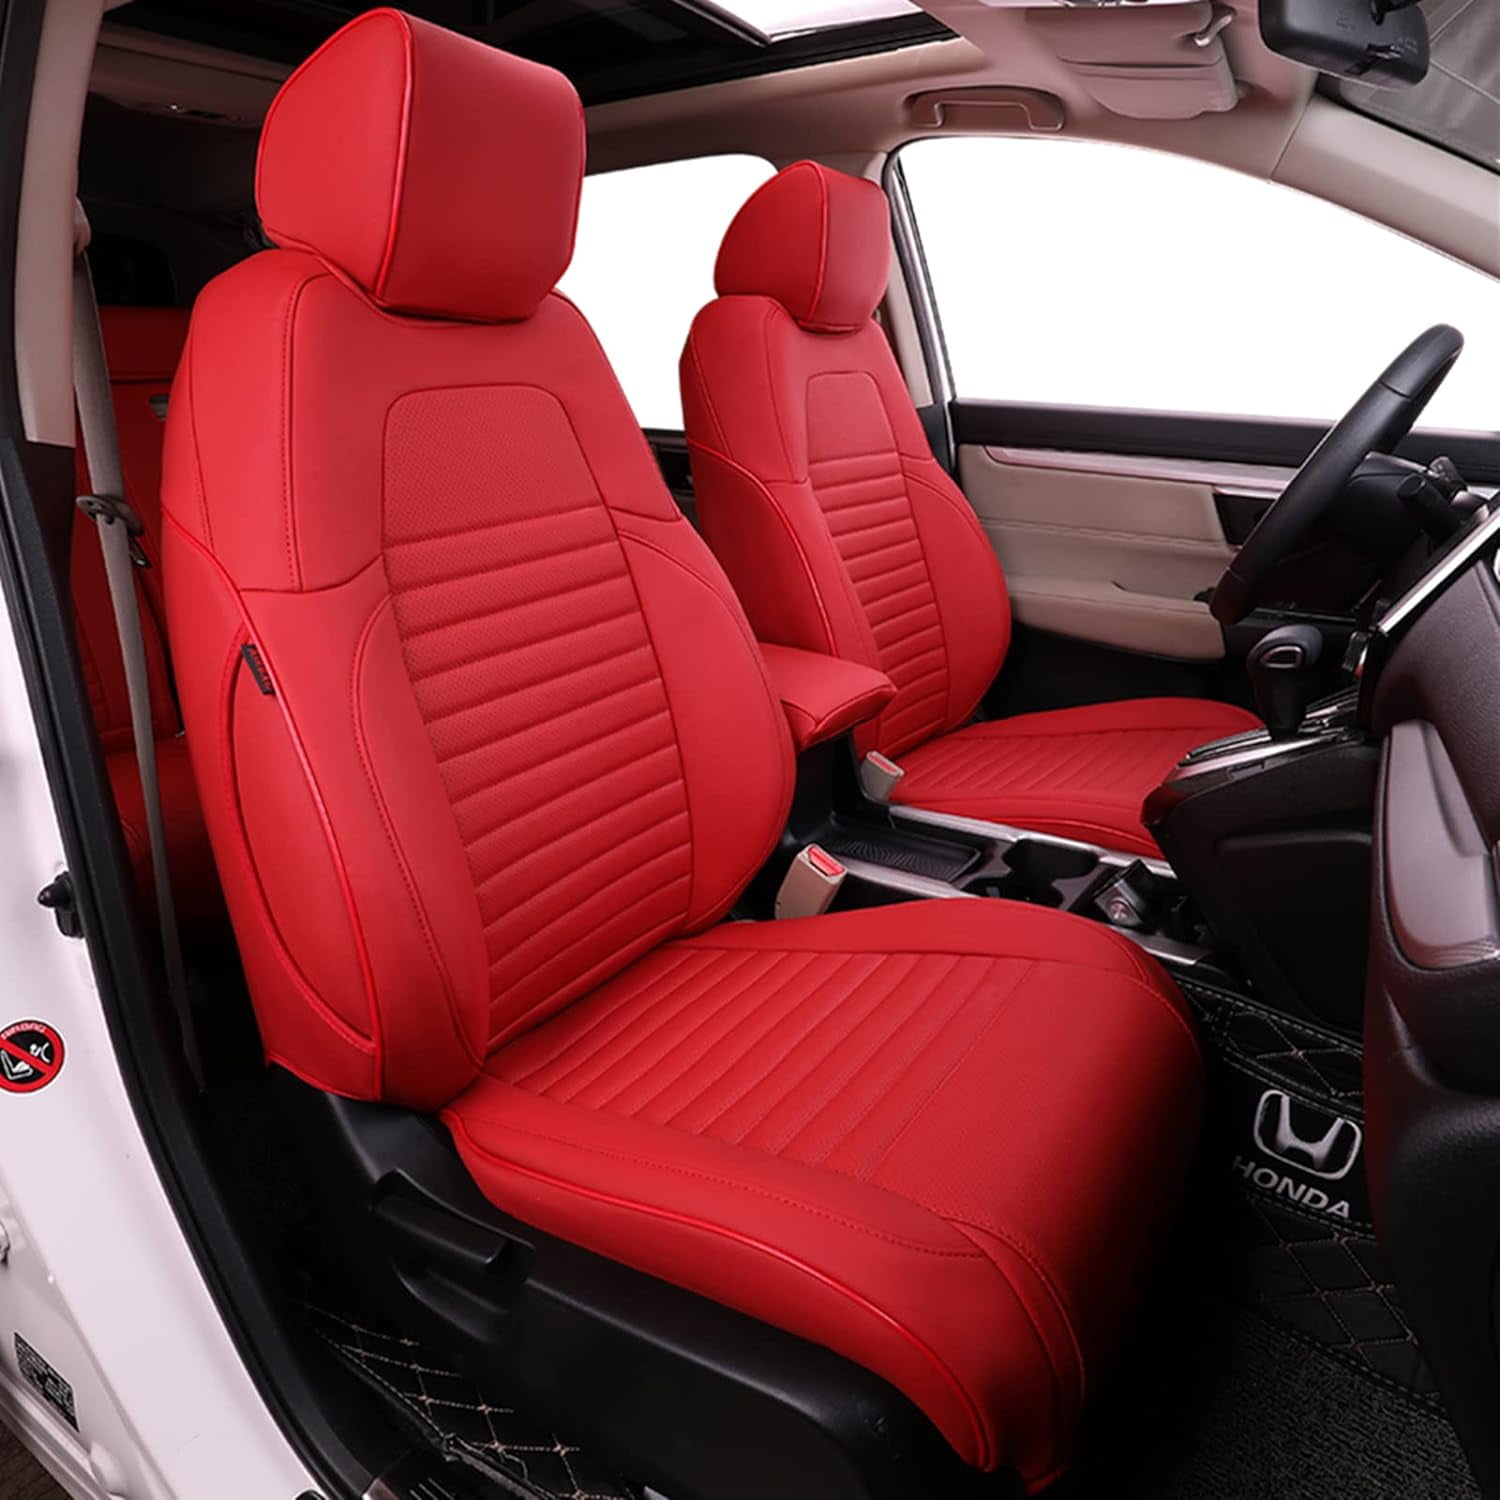 New Design Cushion Set For Women, Woman Car Interior Decoration Pink Red  Cushion High Quality Pu Leather Car Seat Covers From Bestness, $371.38